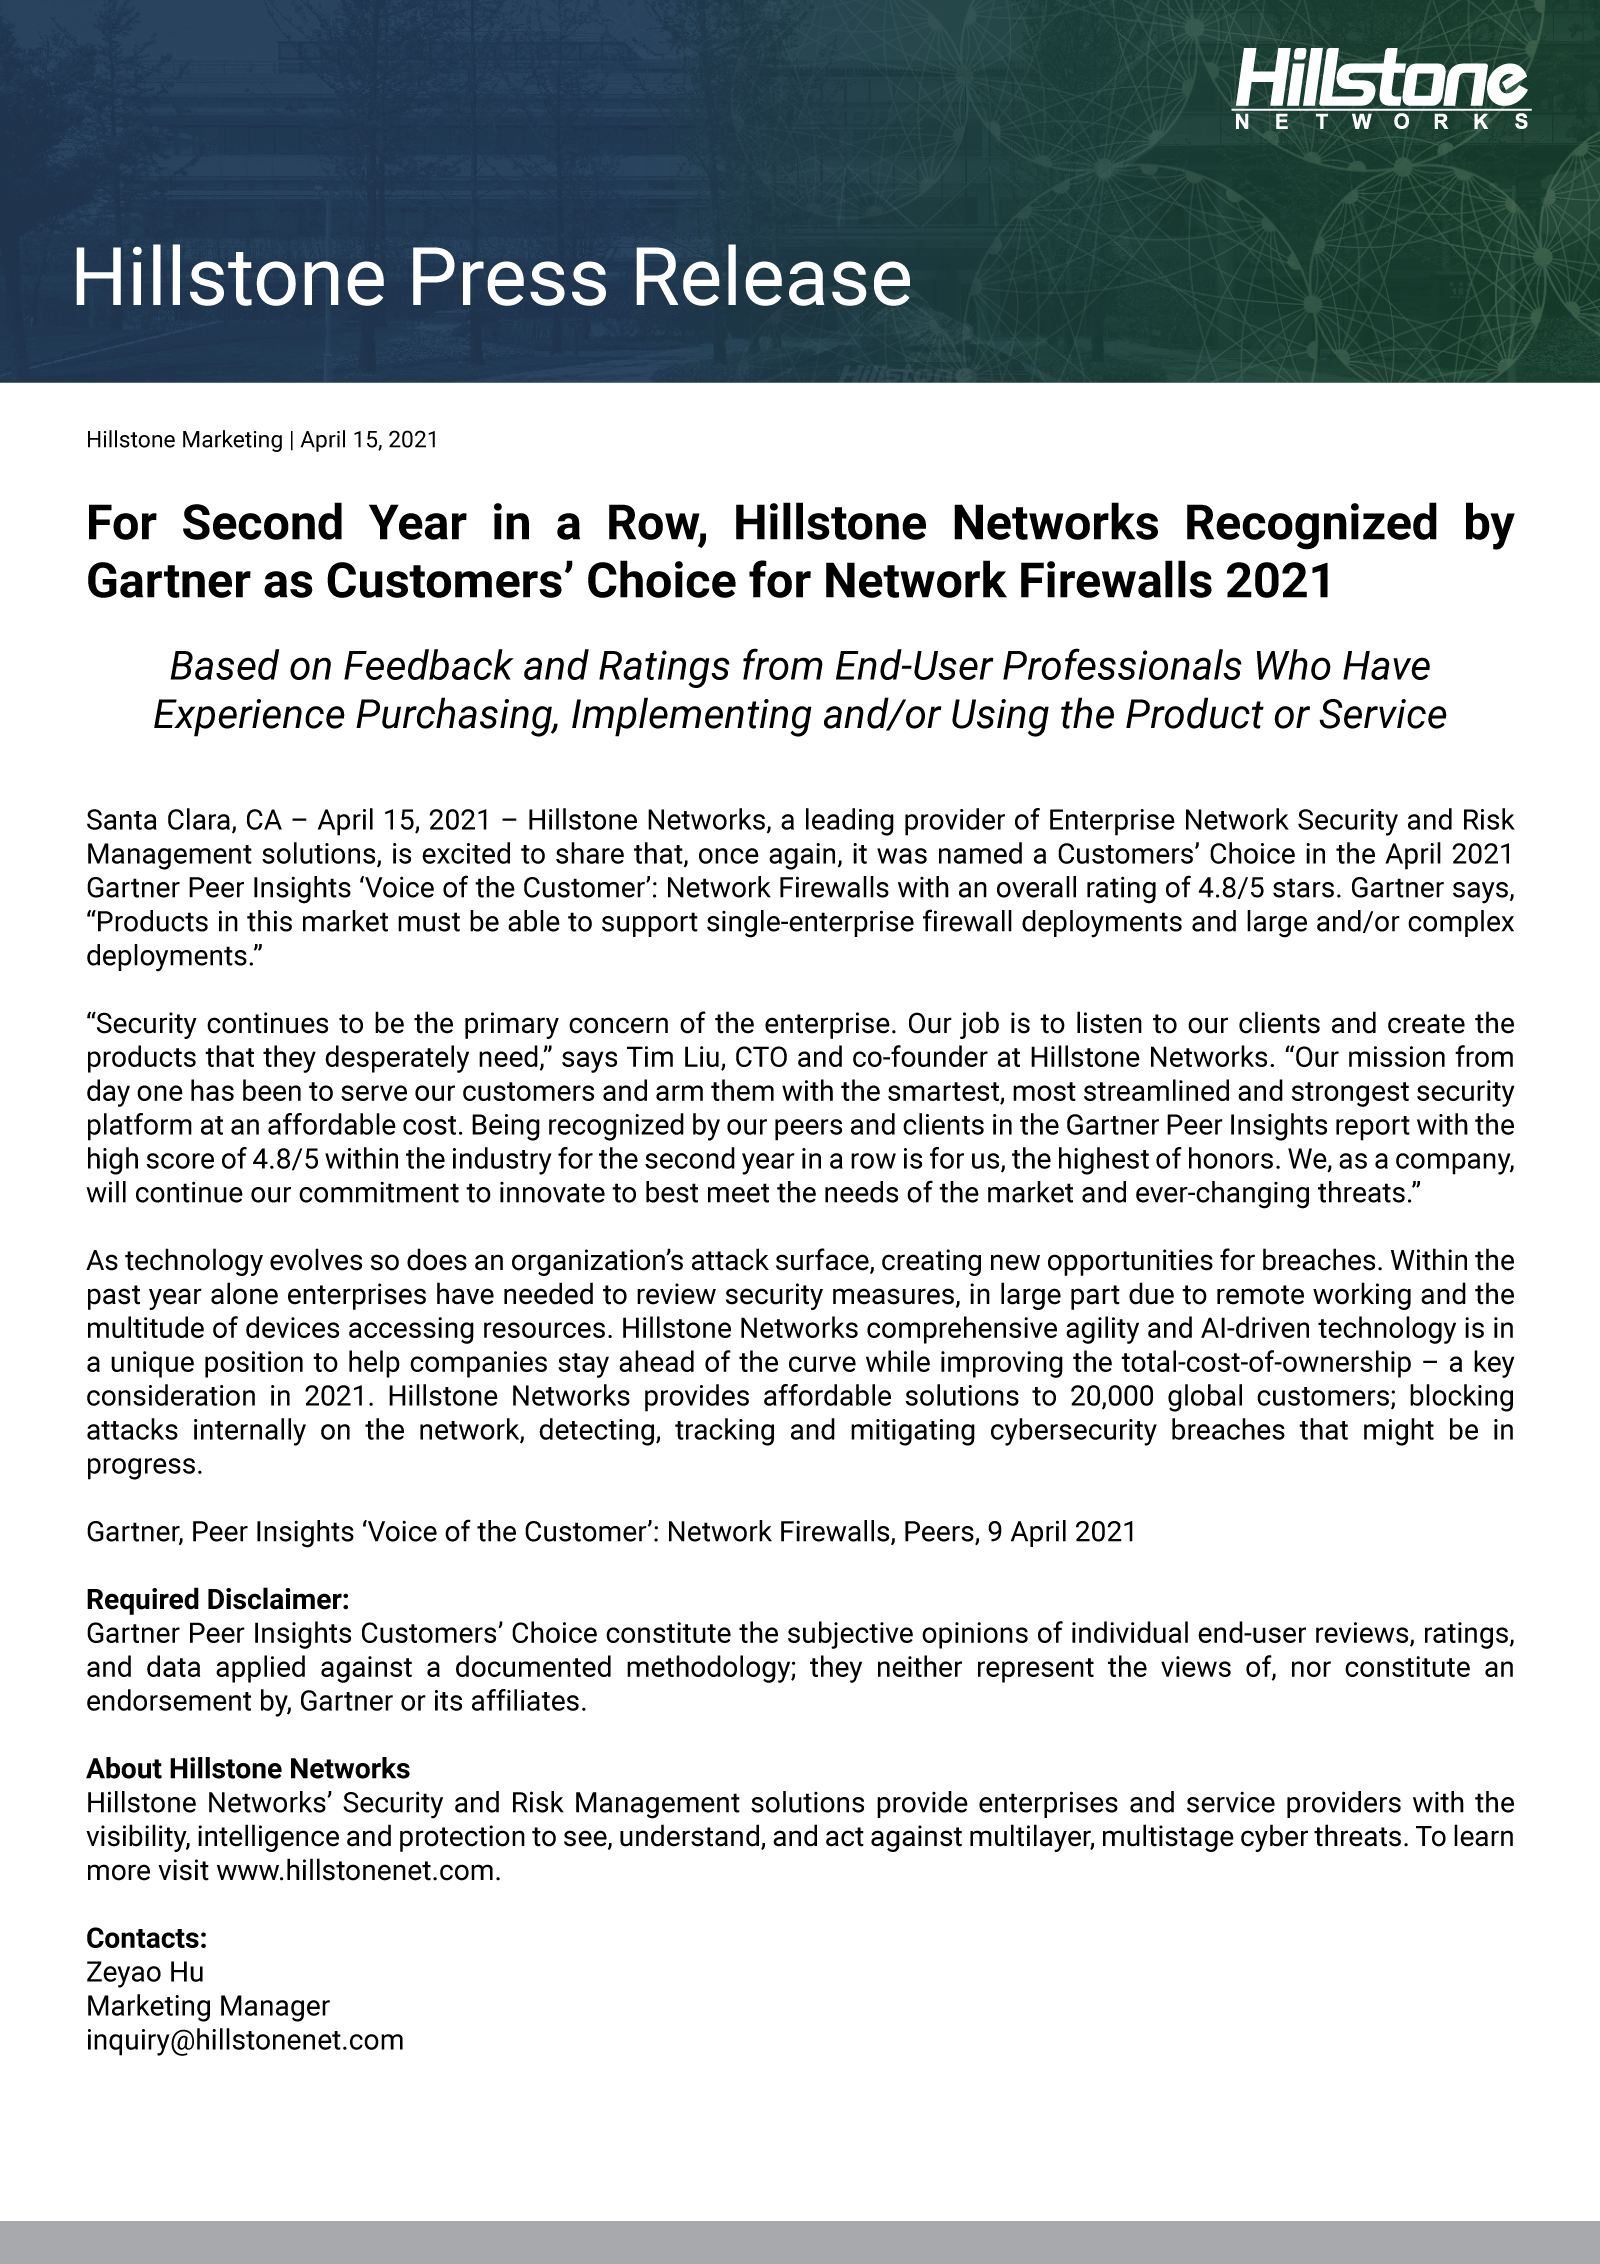 For Second Year in a Row, Hillstone Networks Recognized by Gartner as Customers’ Choice for Network Firewalls 2021